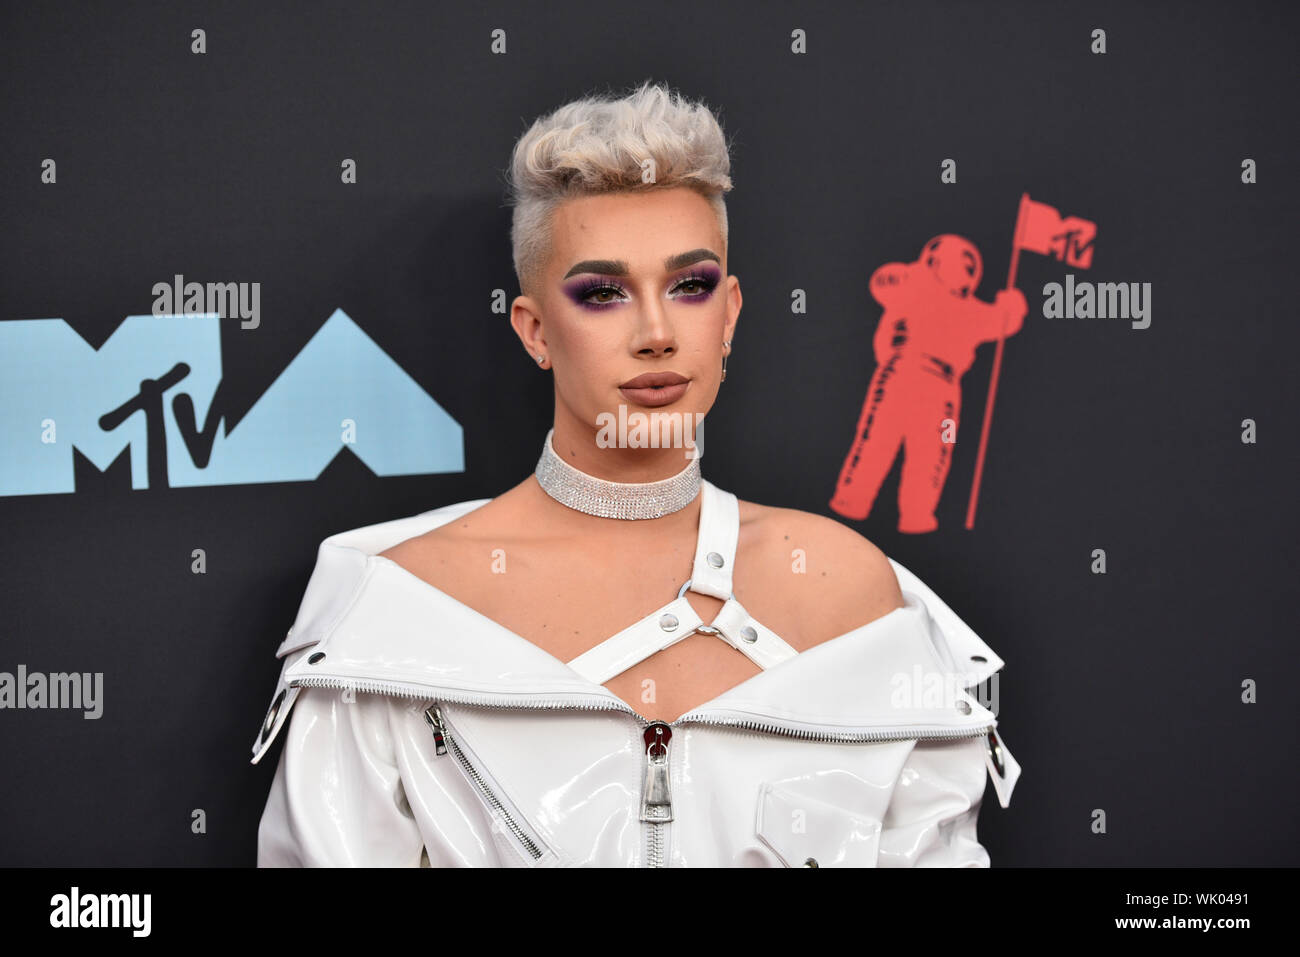 James Charles attends the 2019 MTV Video Music Awards at Prudential Center on August 26, 2019 in Newark, New Jersey. Stock Photo